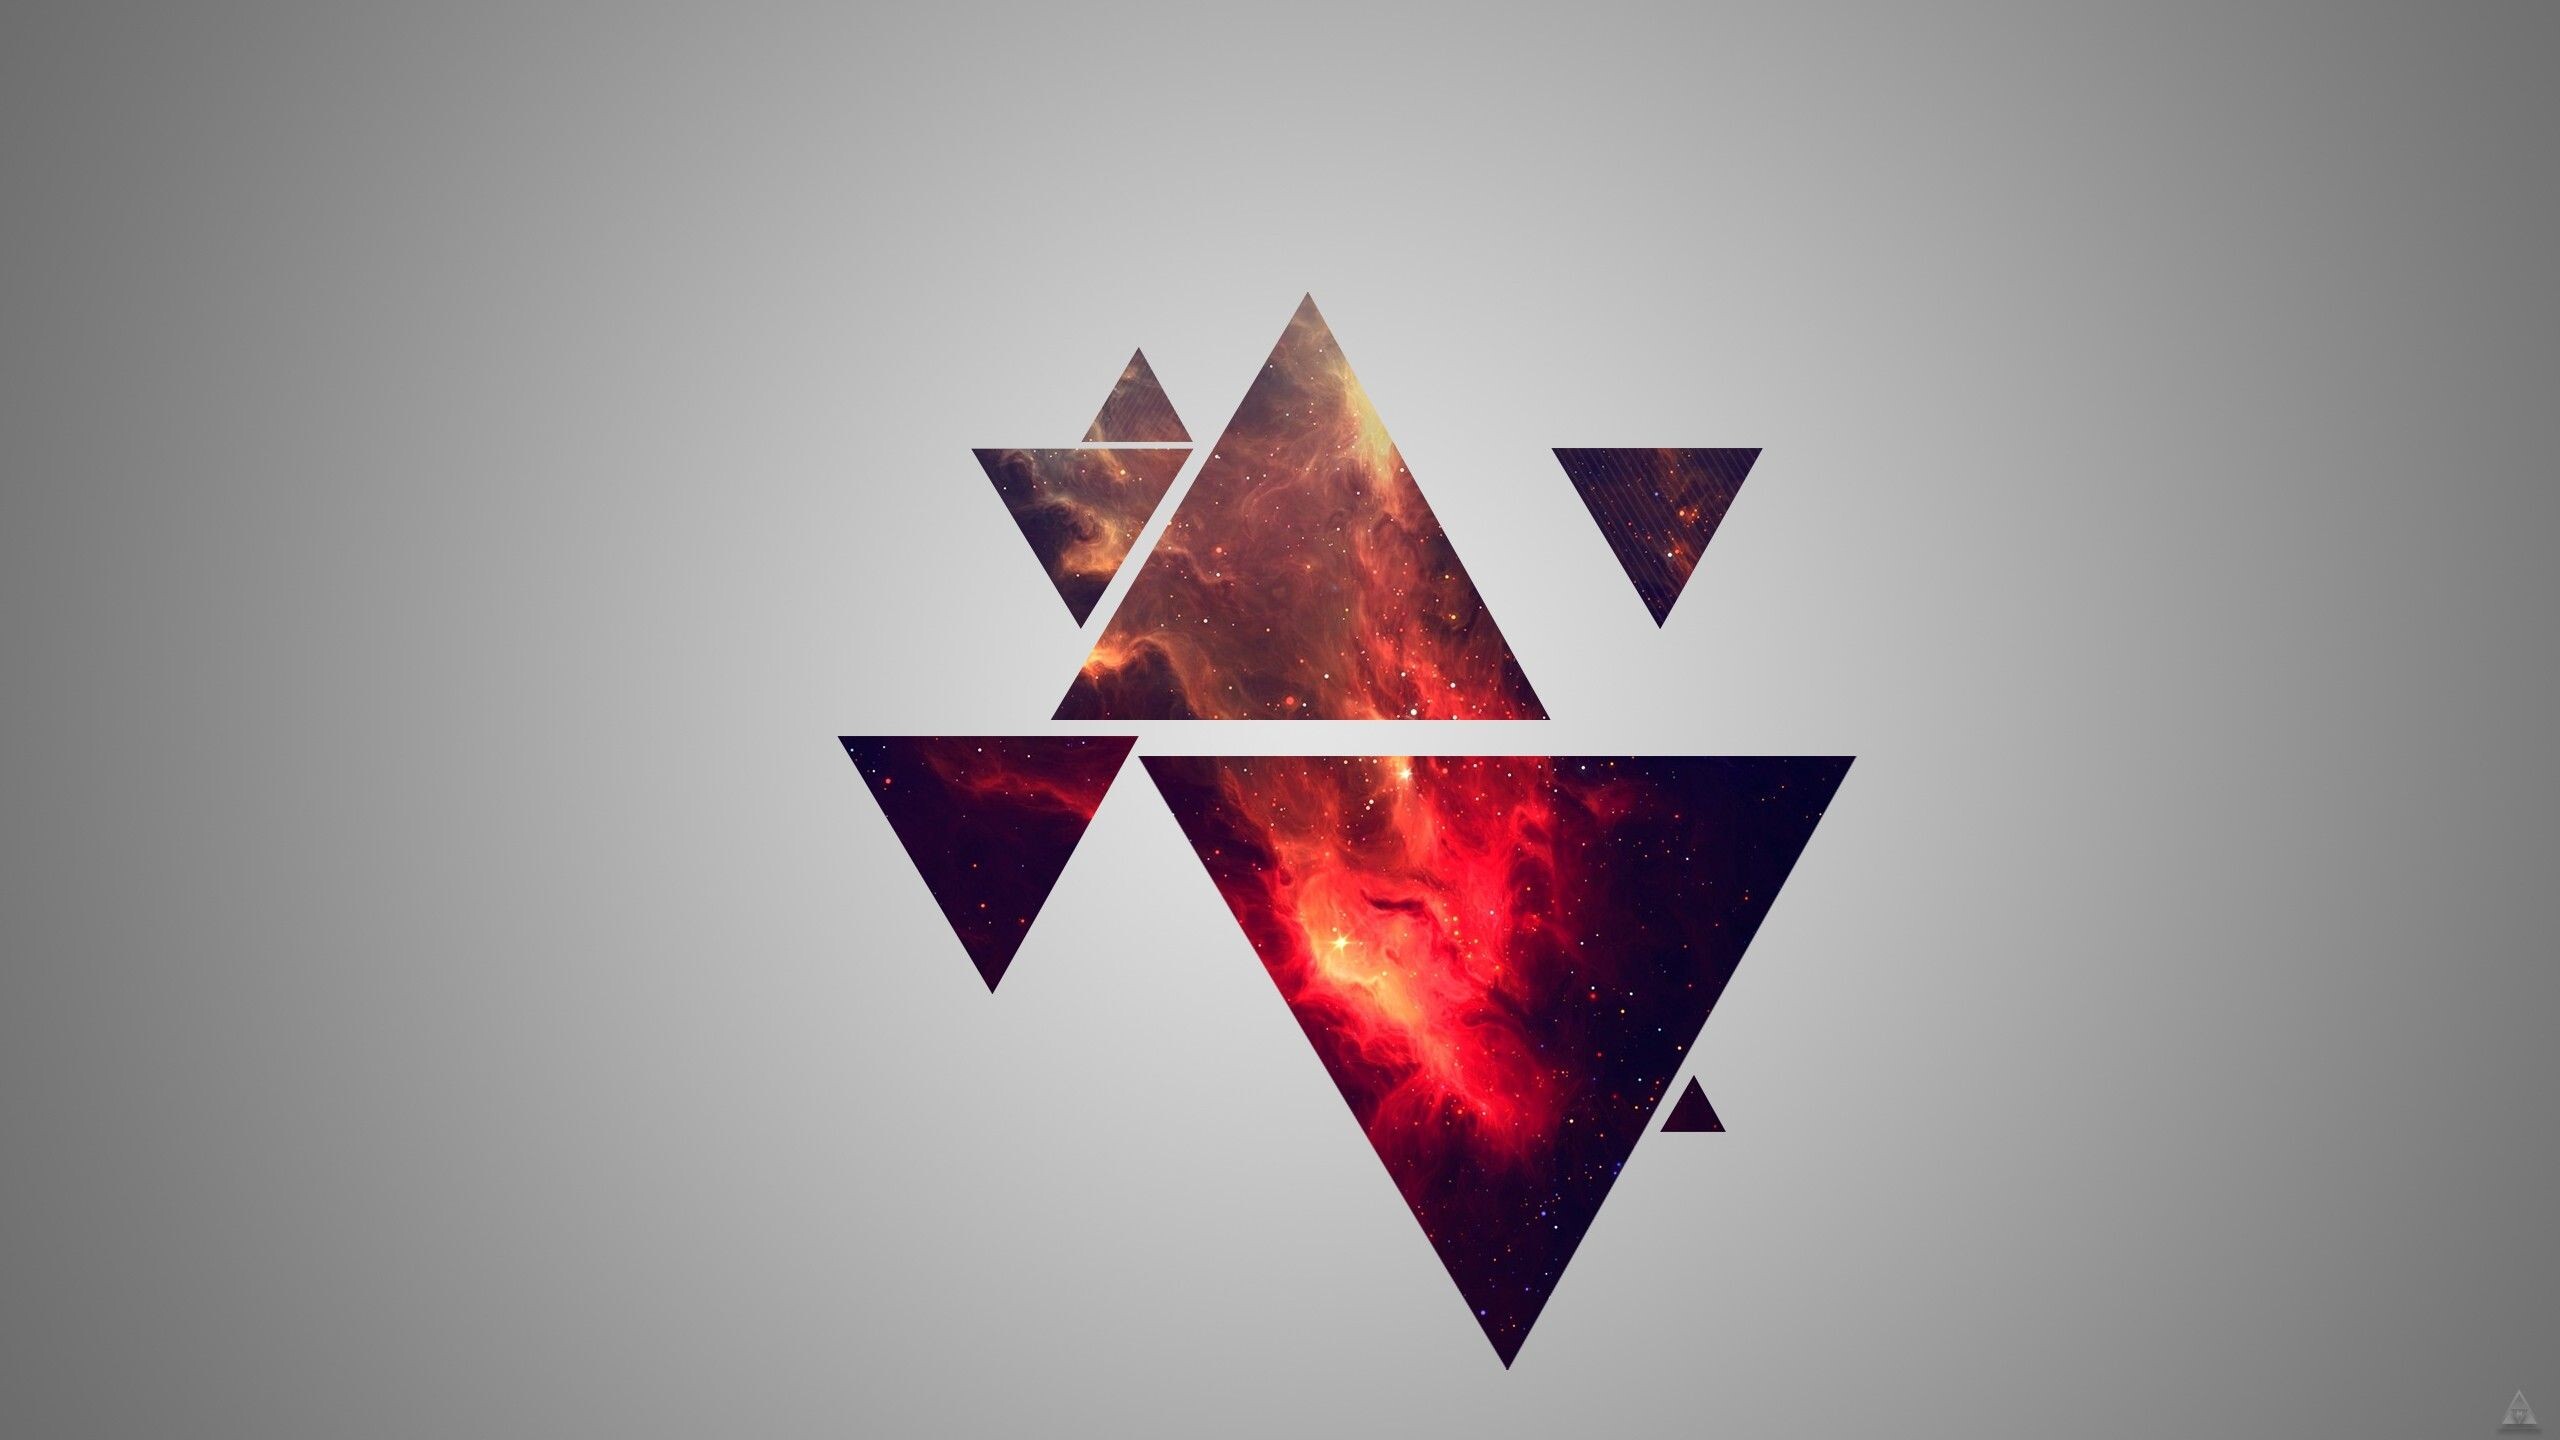 Triangle: Abstract minimalistic nebulae artwork, Simple polygons. 2560x1440 HD Wallpaper.